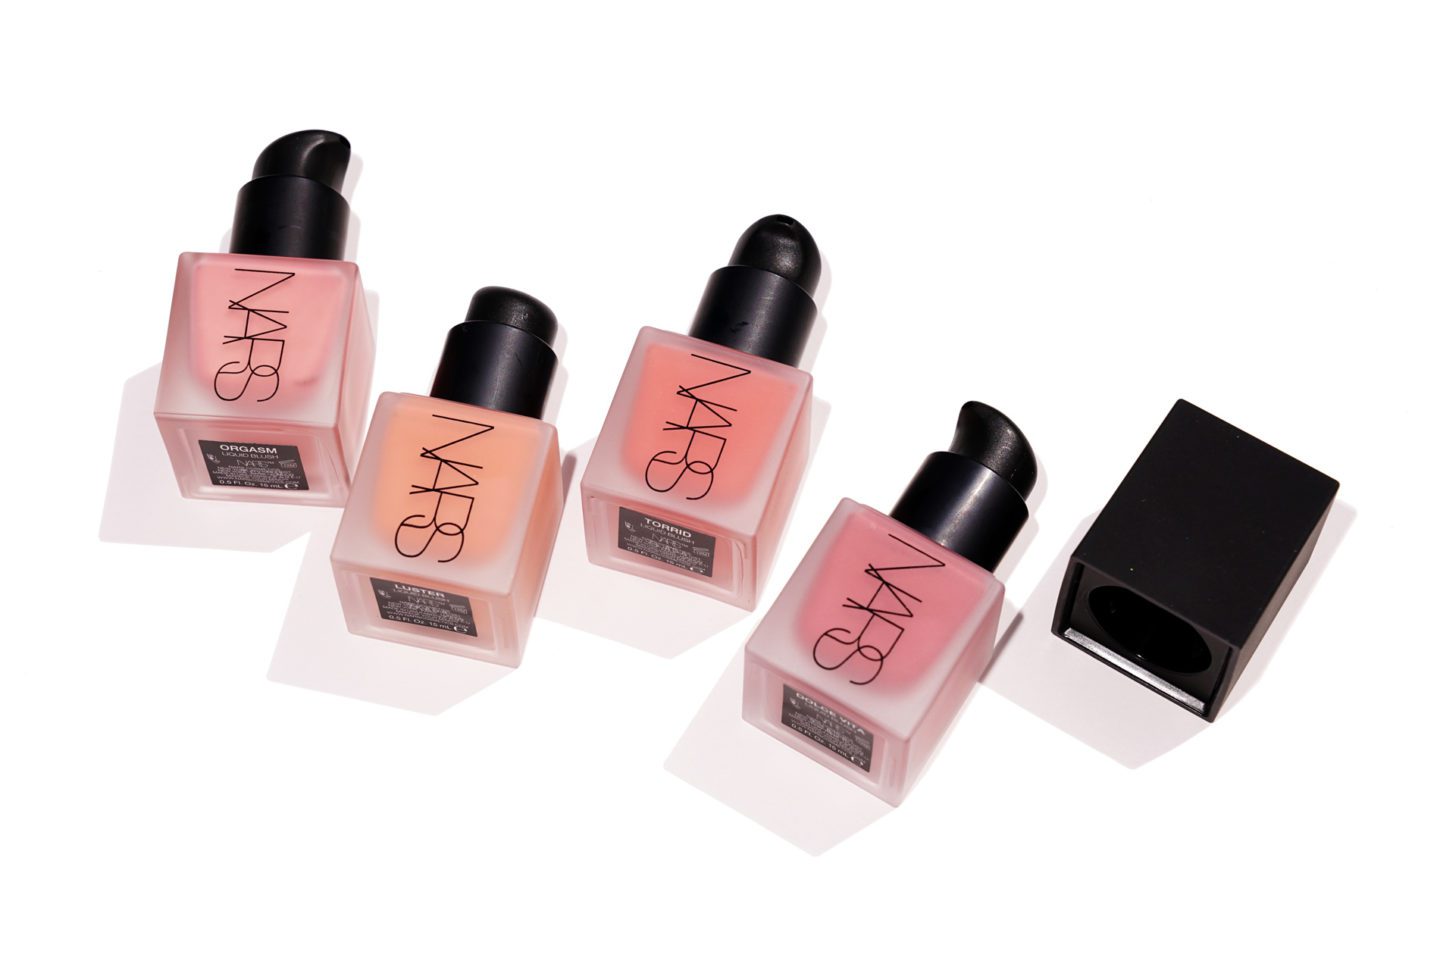 NARS Liquid Blush Review and Swatches | The Beauty Look Book